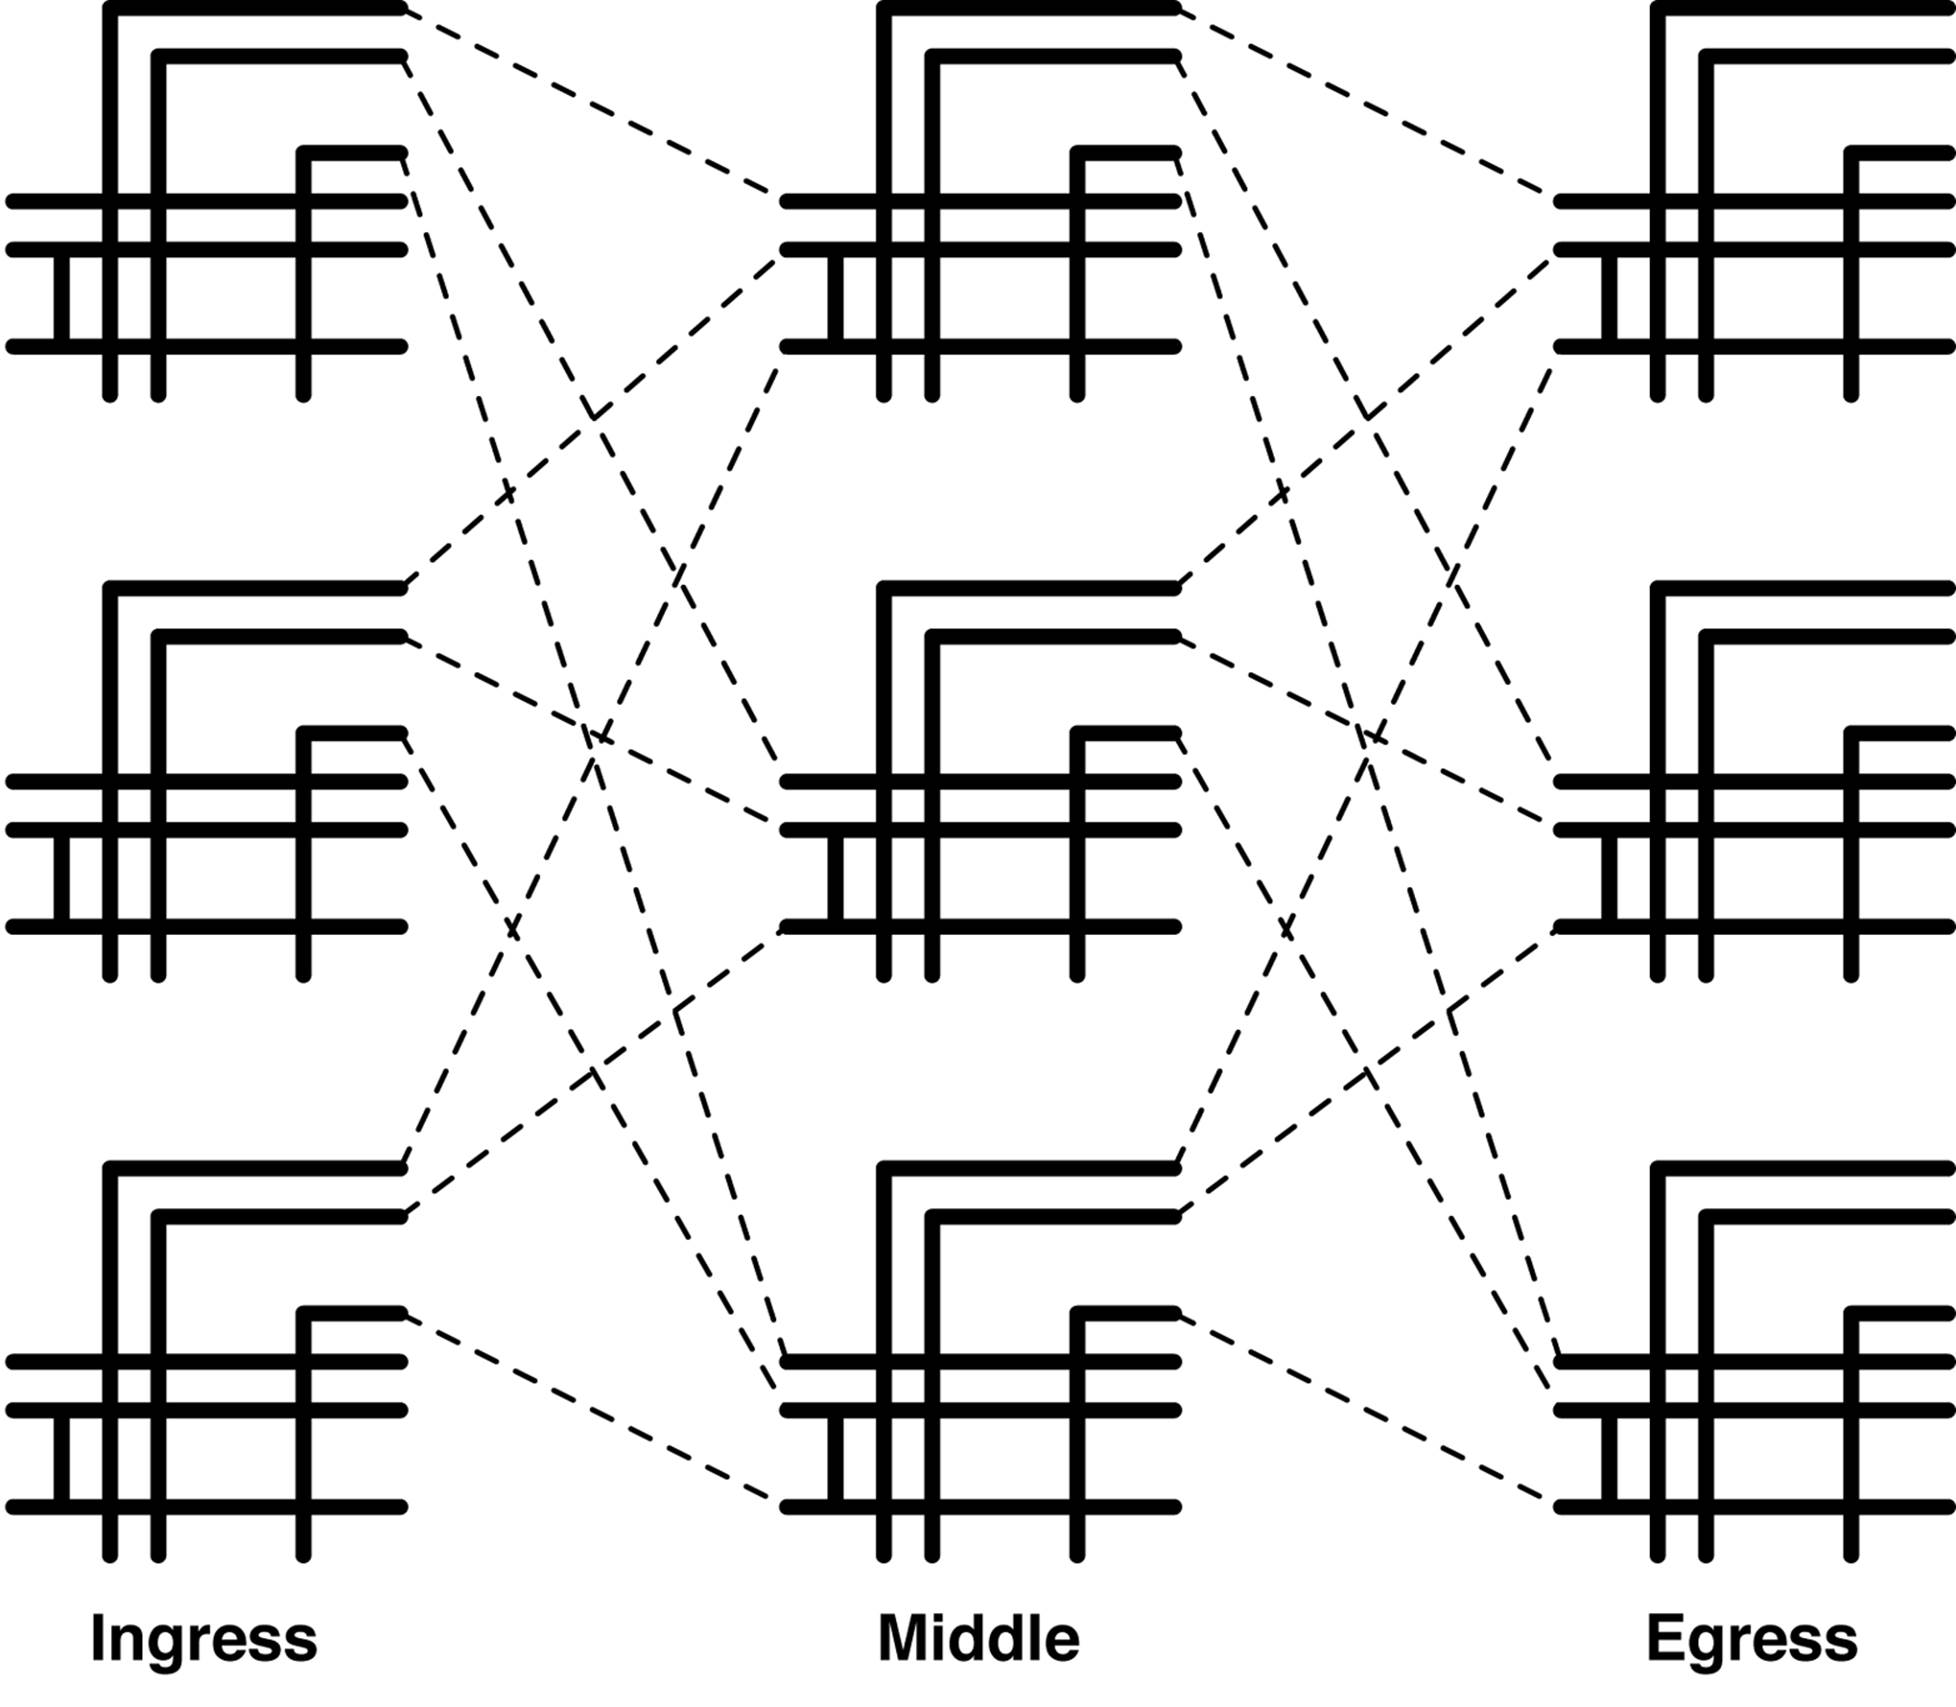 Charles Clos’ multistage topology